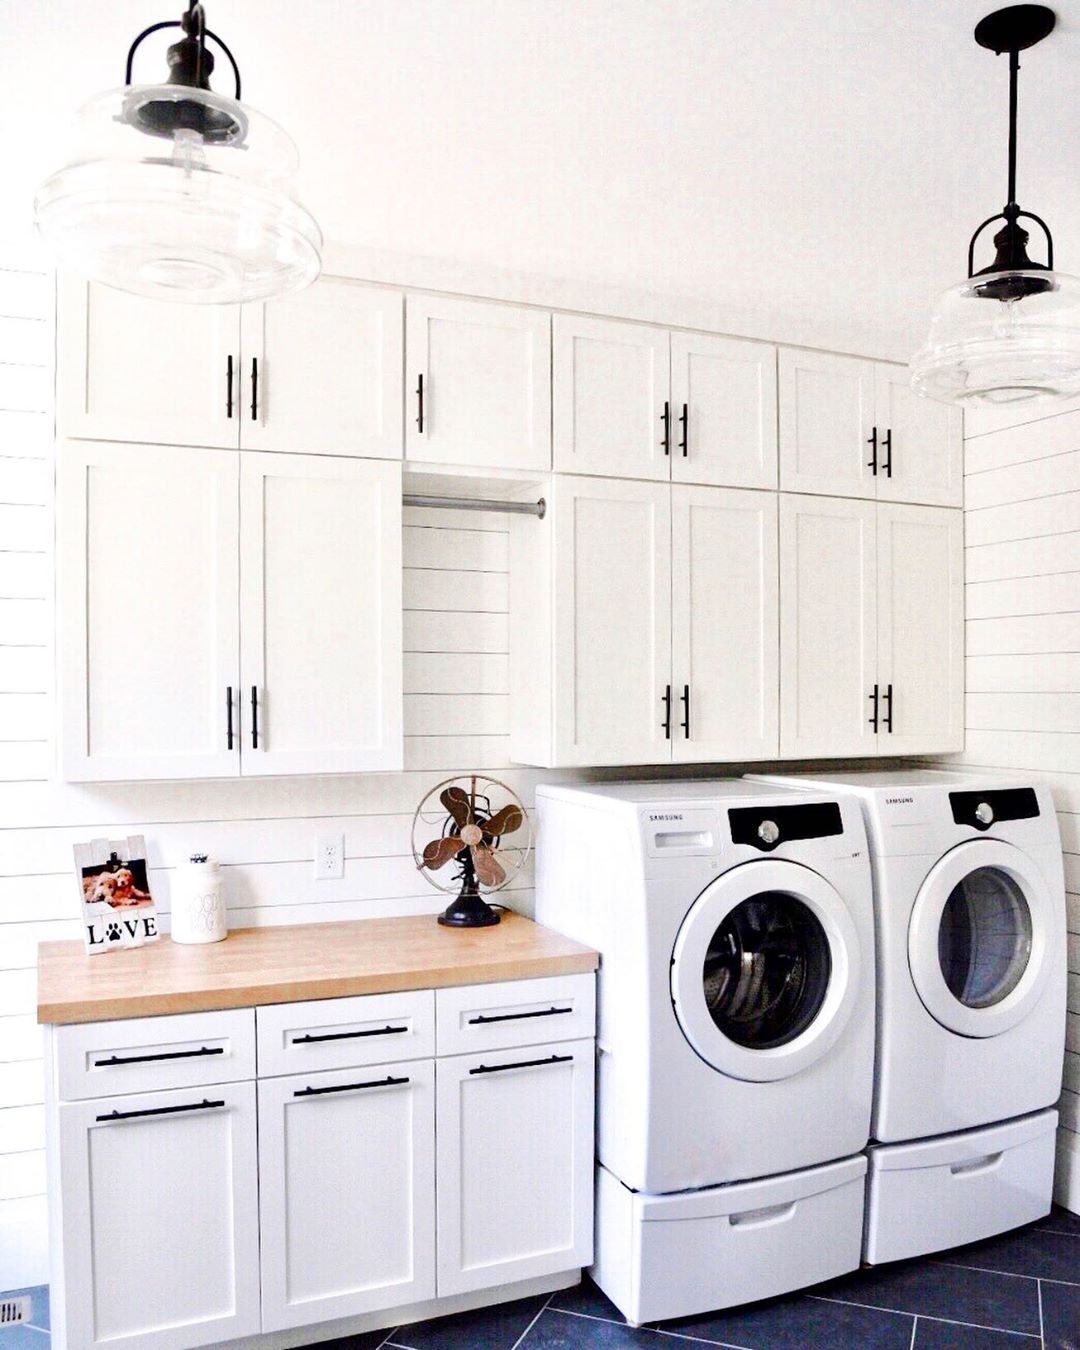 Spacious farmhouse-style laundry room. Photo by Instagram user @brunoandlibby